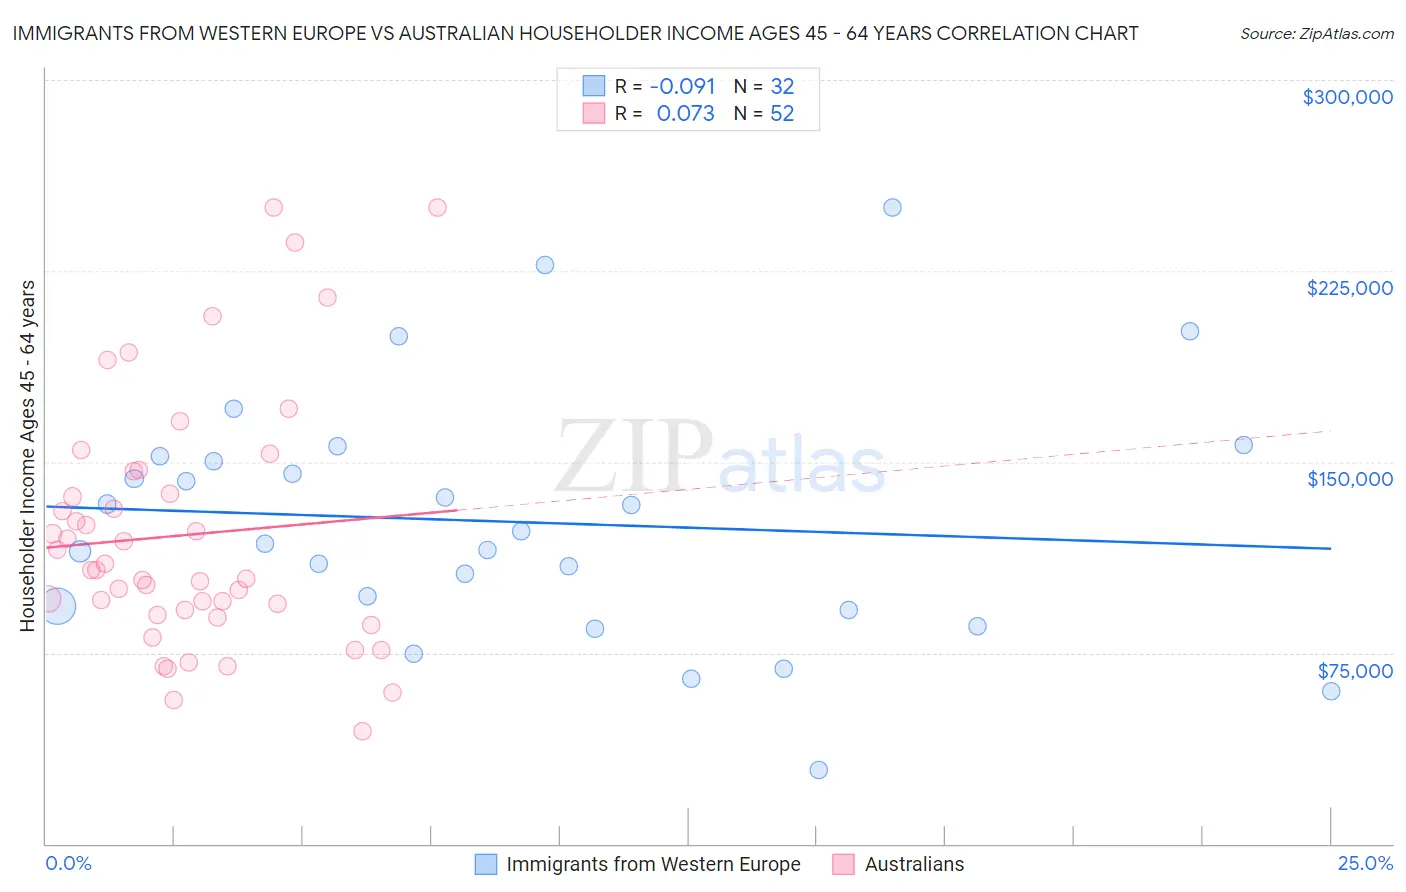 Immigrants from Western Europe vs Australian Householder Income Ages 45 - 64 years